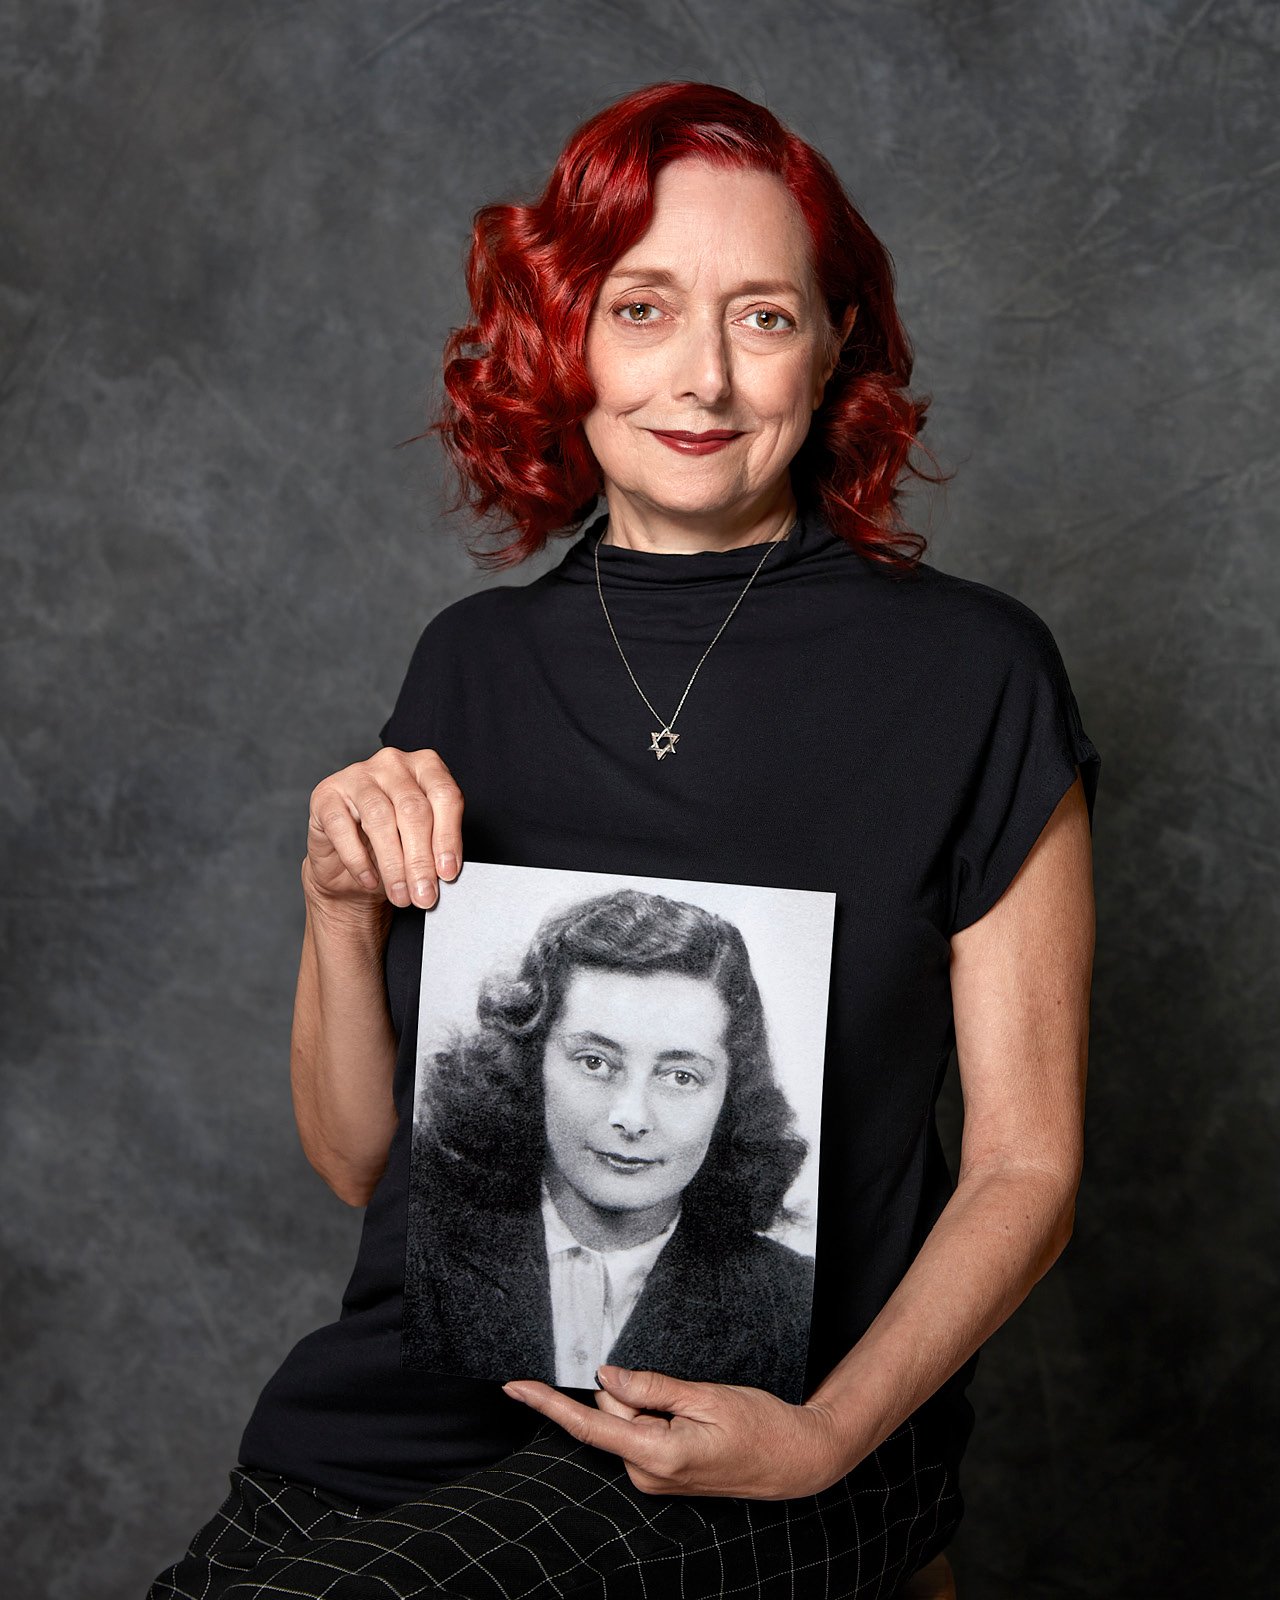 A woman with red hair sits against a grey background holding a black and white photograph of her mother.